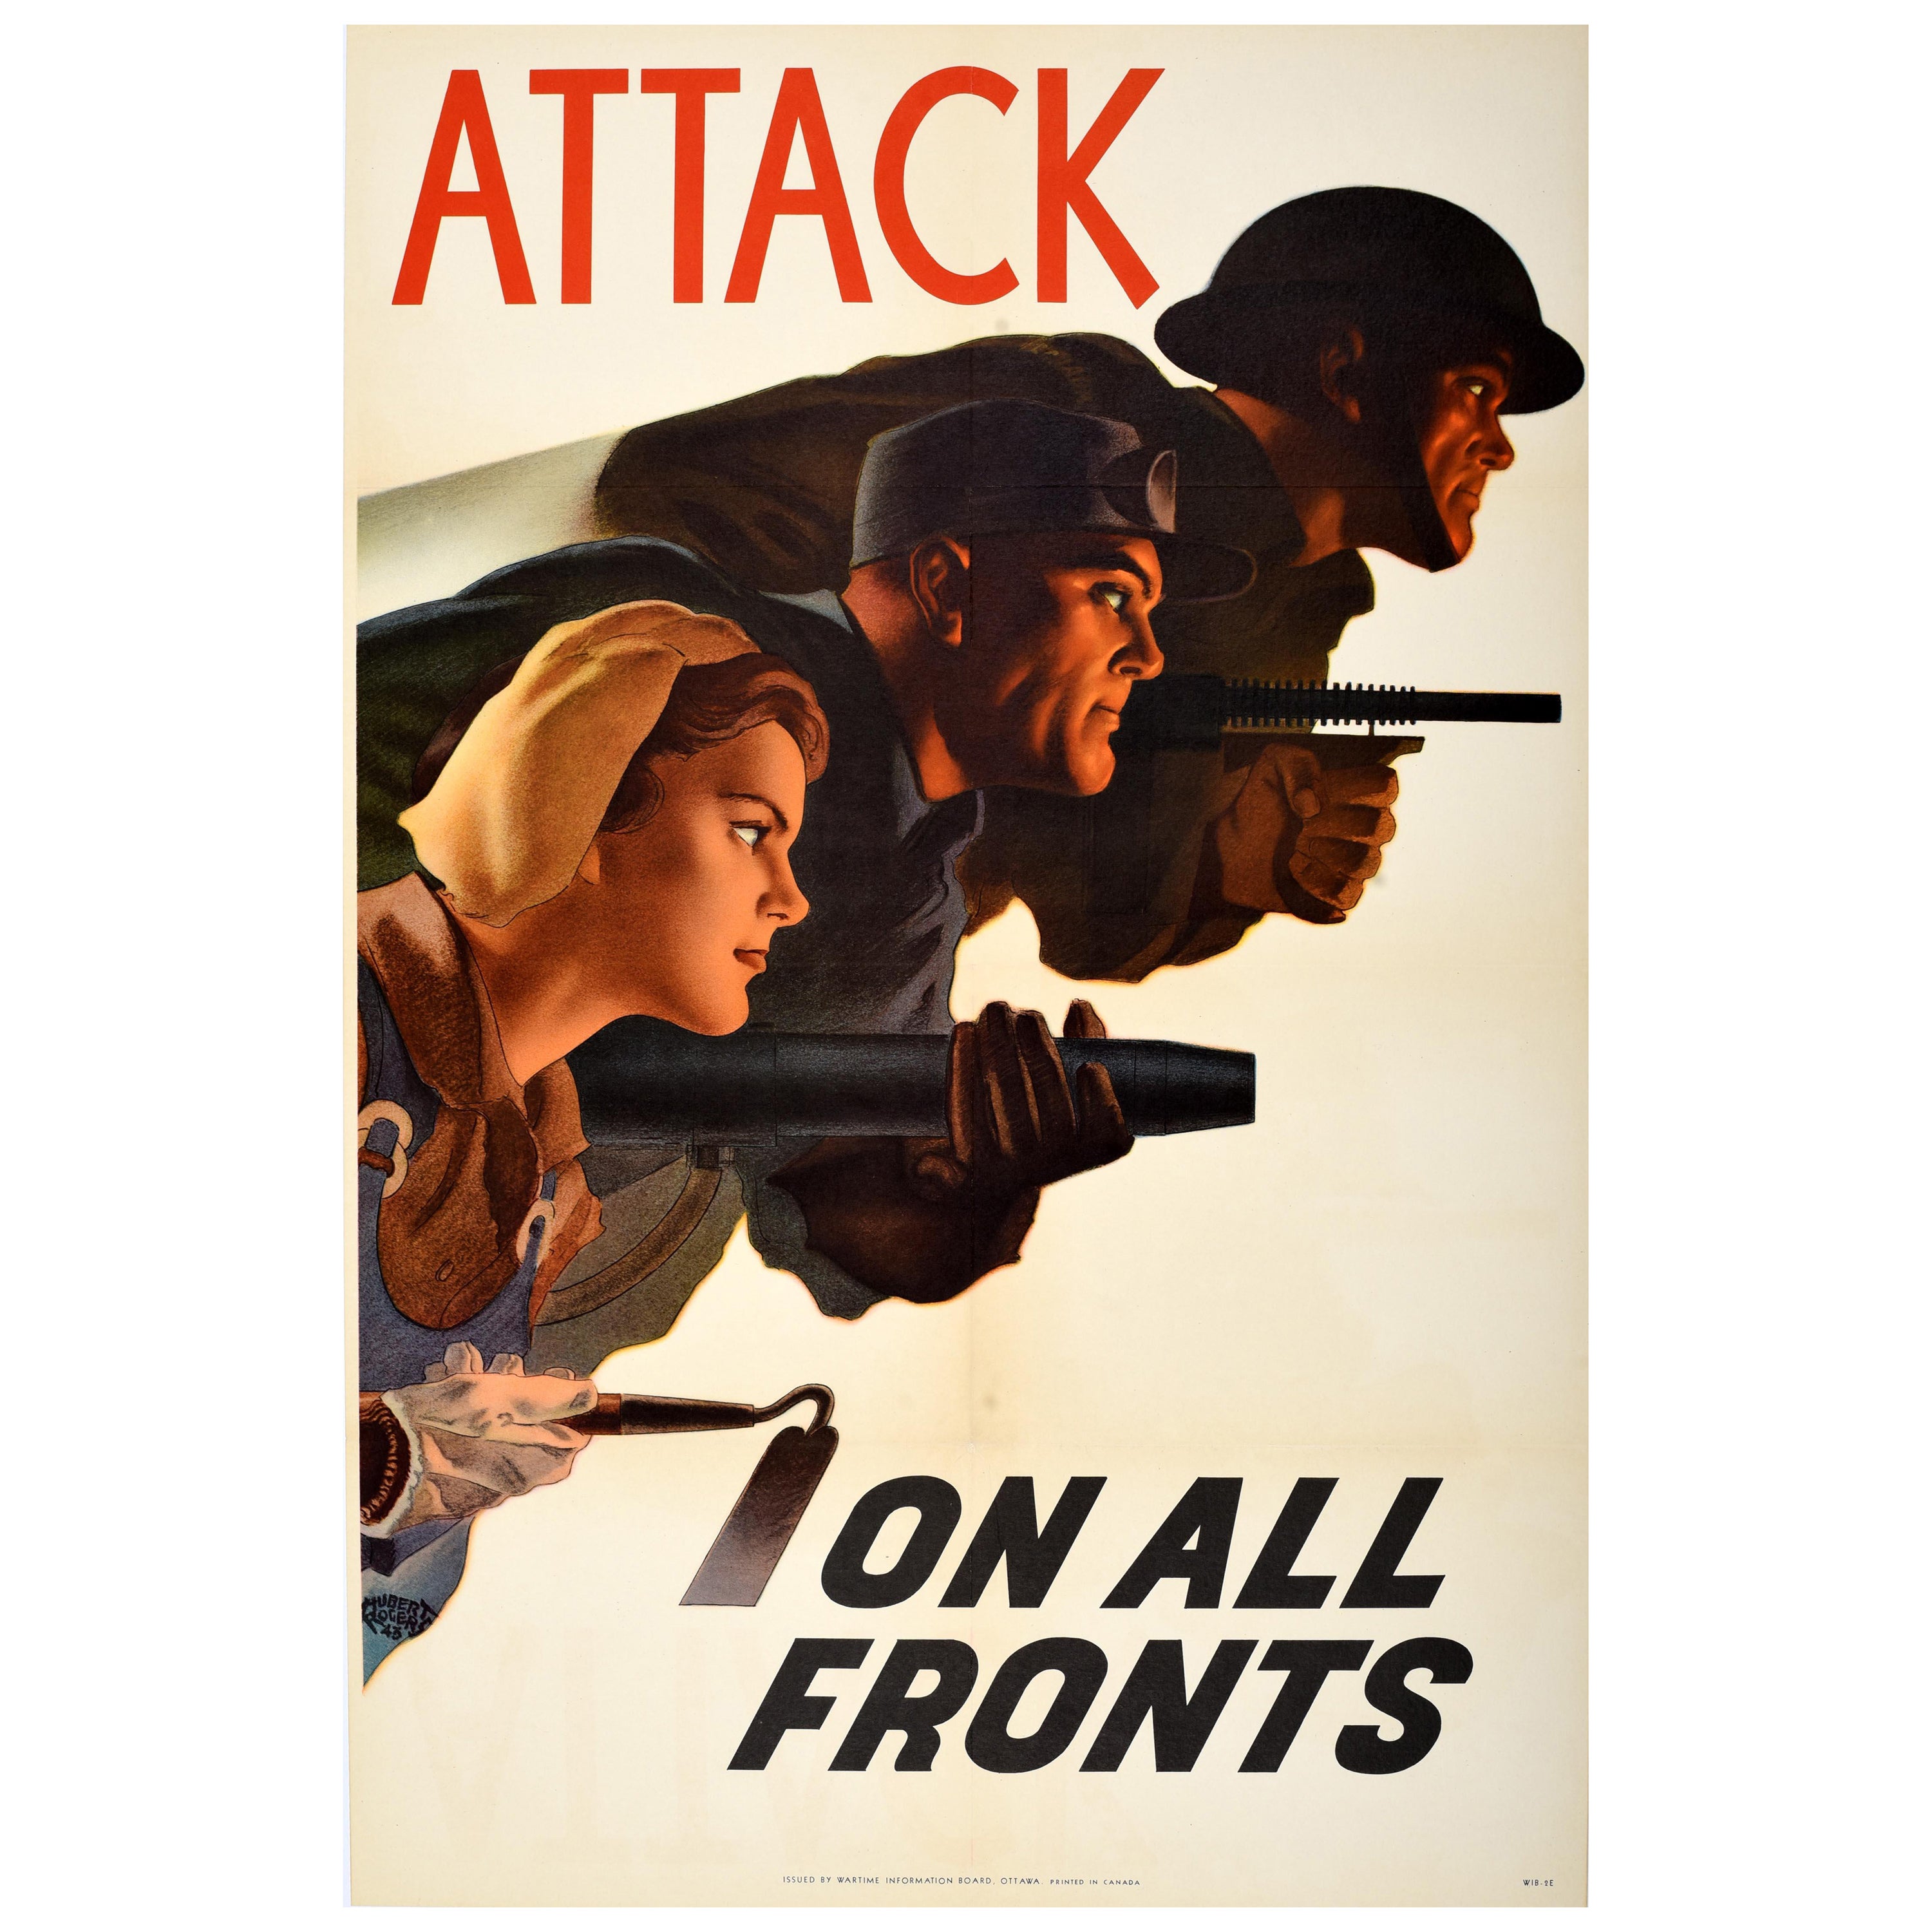 Original Vintage War Poster Attack On All Fronts WWII Canada Hubert Rogers